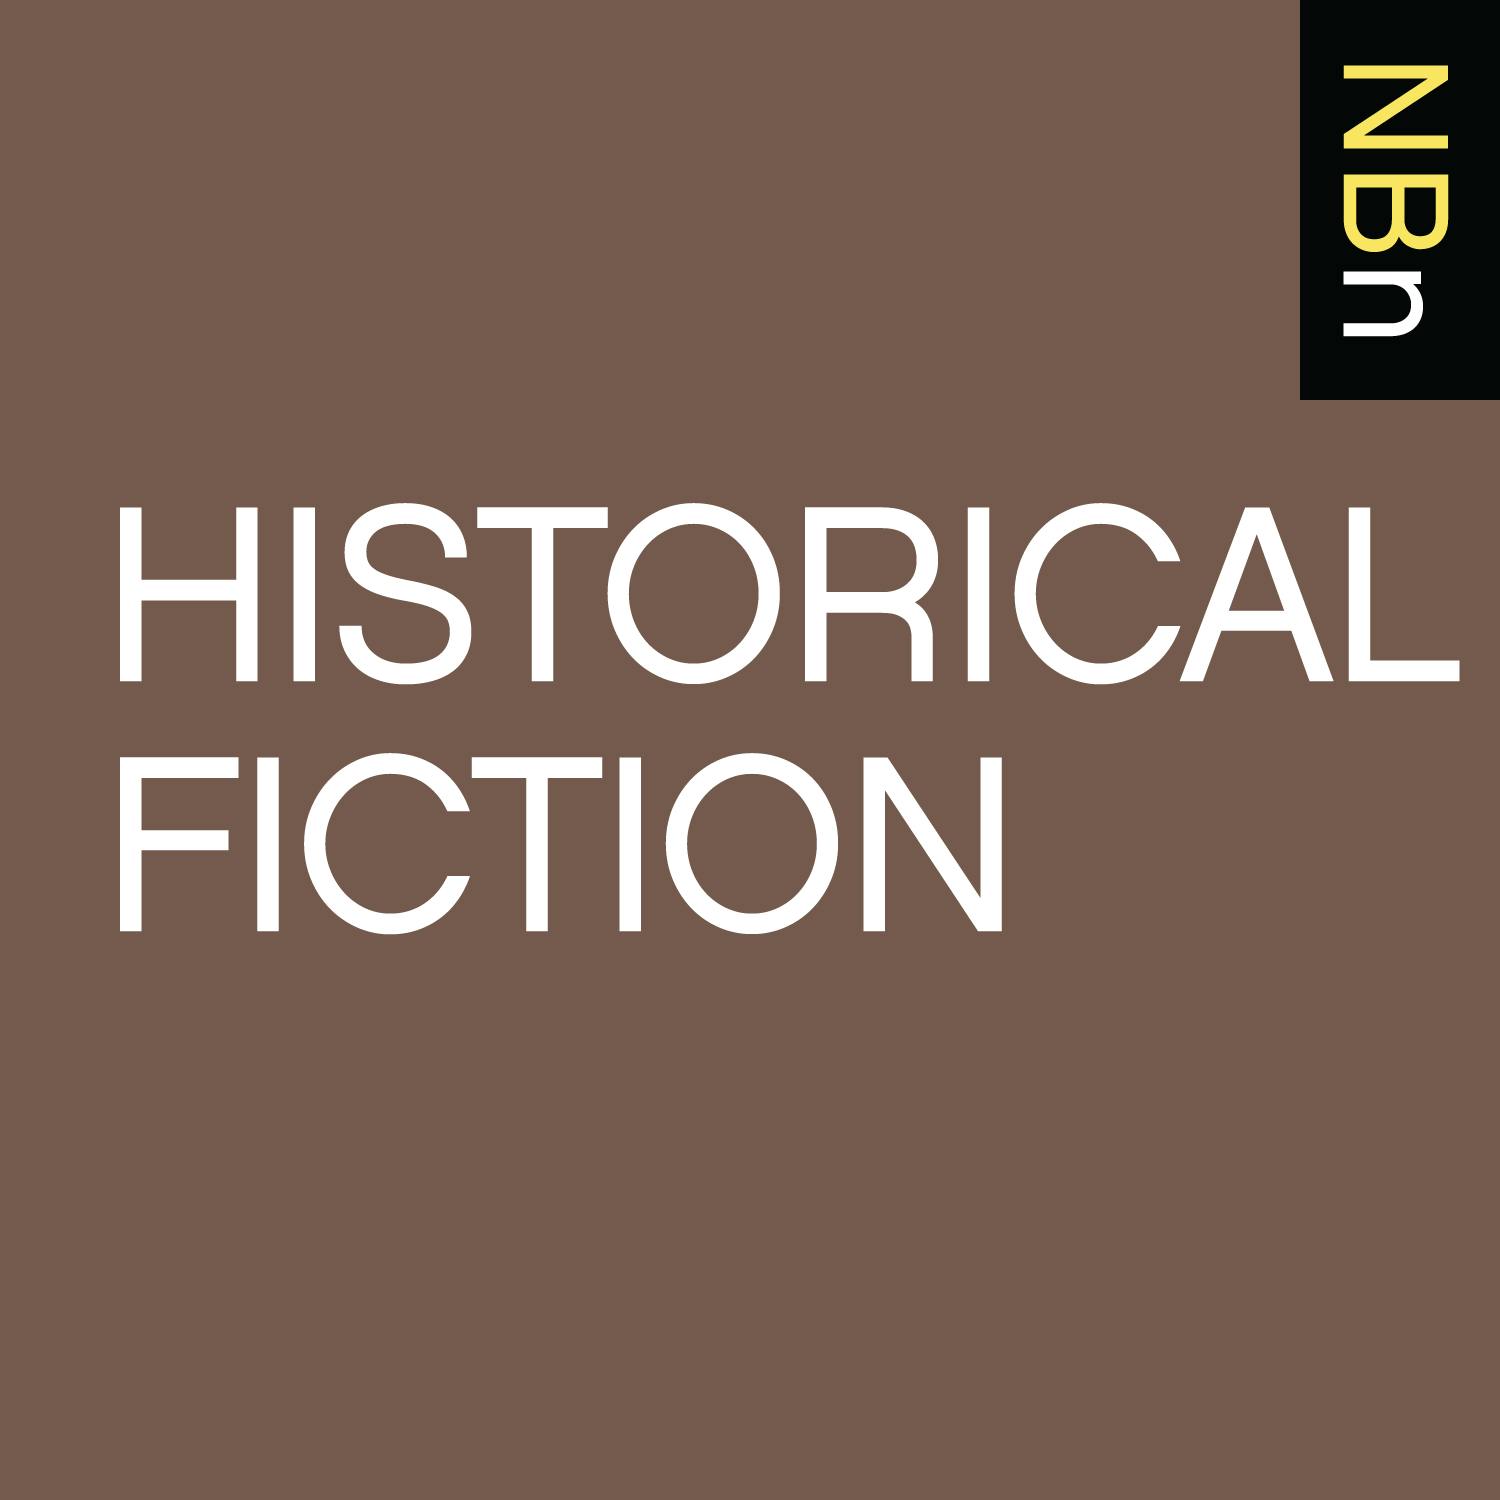 Premium Ad-Free: New Books in Historical Fiction podcast tile